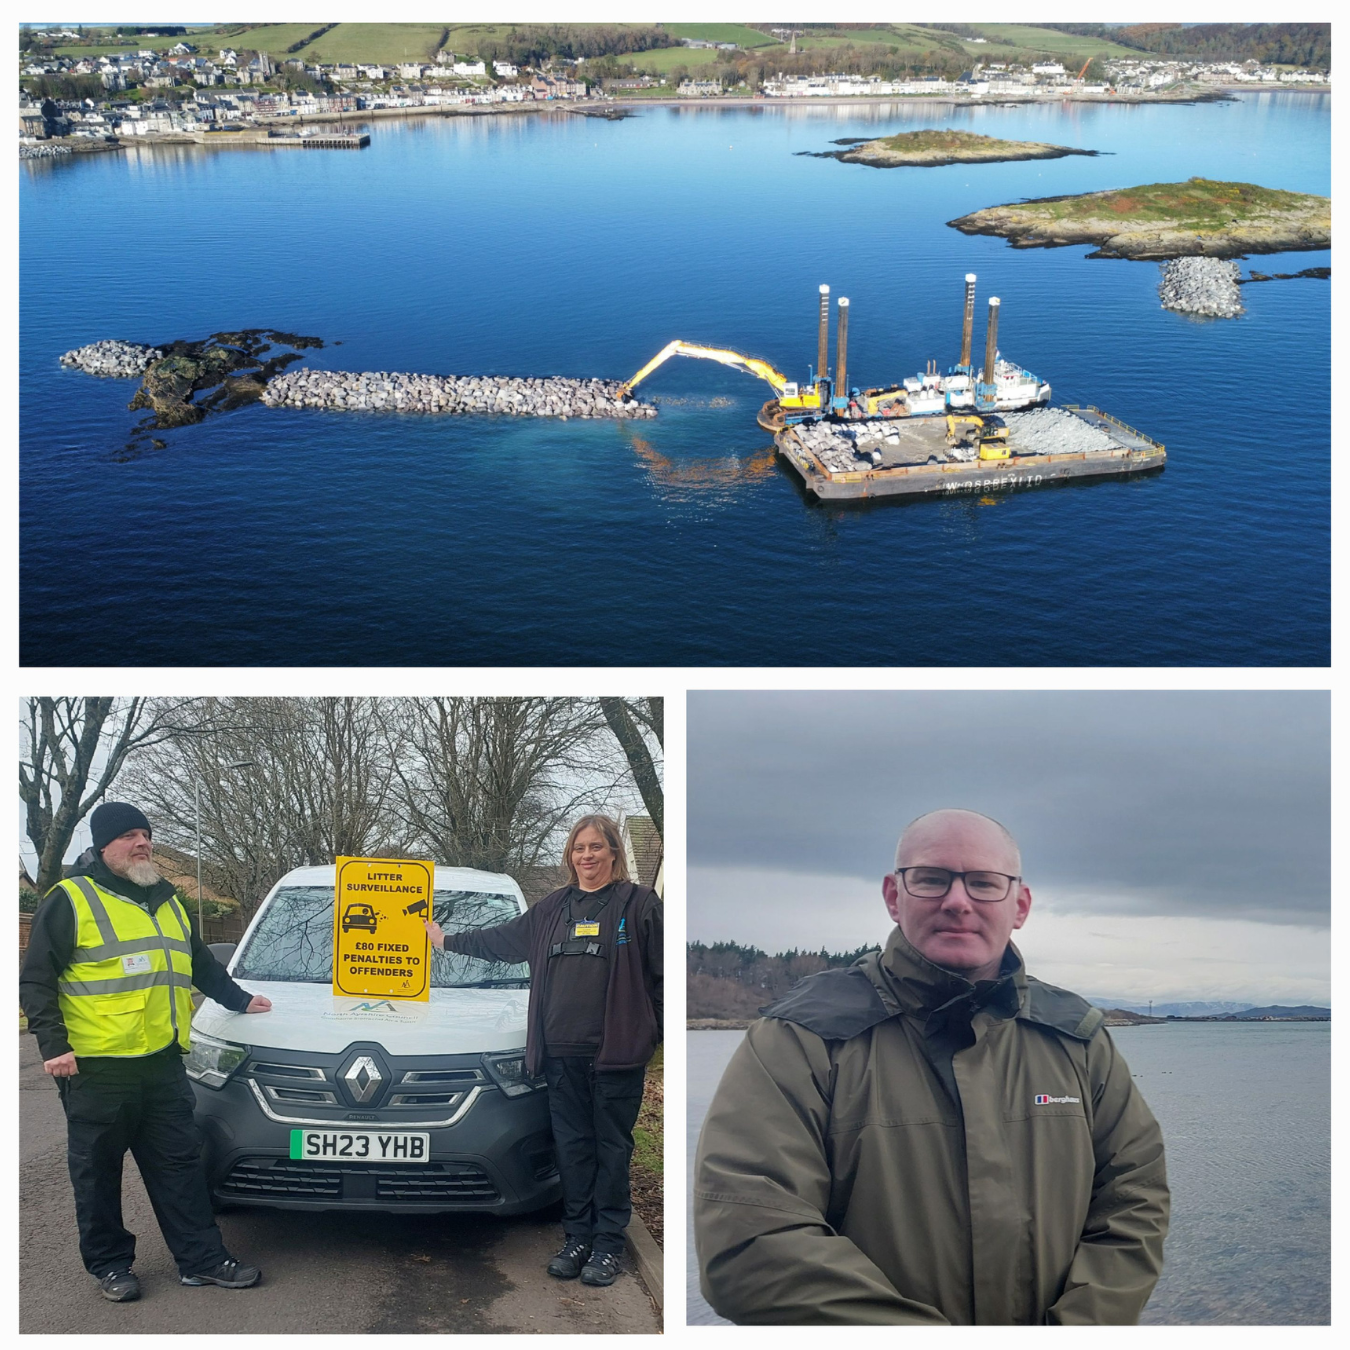 Campaign coverage below has included (from top, left) Millport Flood Protection Scheme, Biodiversity Officer Neal Lochrie and Environmental Enforcement Officers Julie Donnan and Steven Lyon